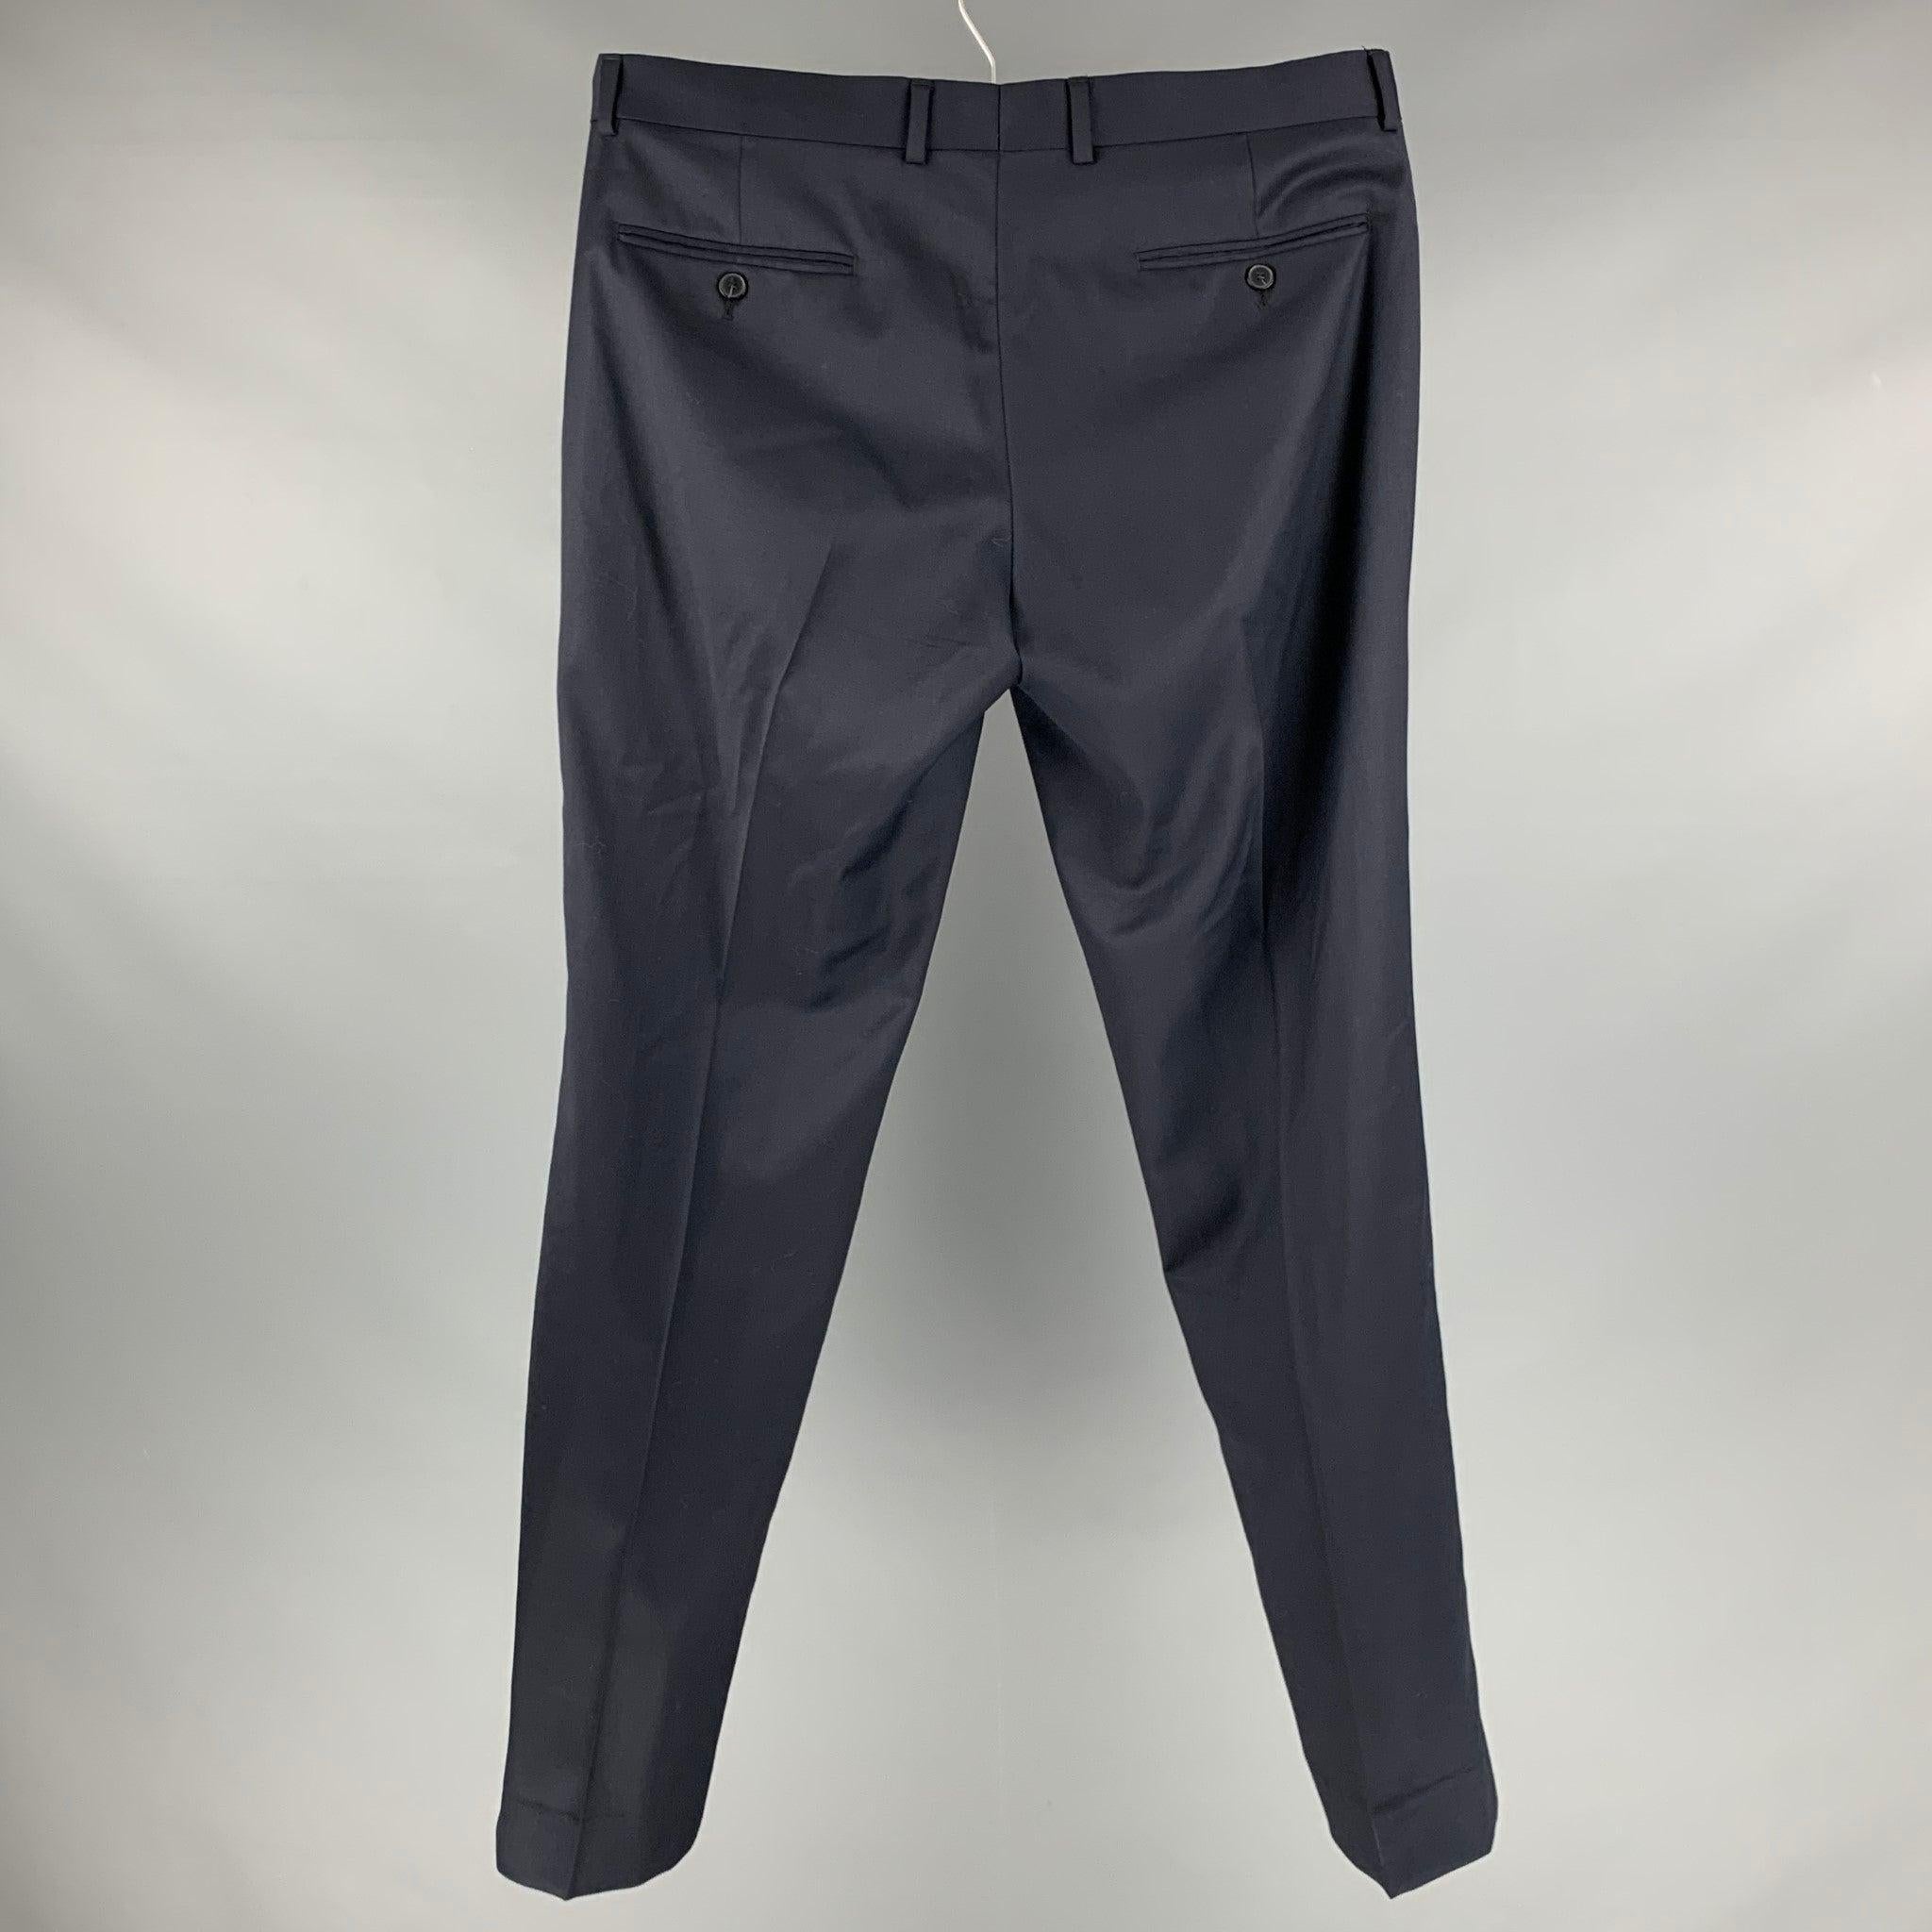 SANDRO
dress pants in a navy wool fabric featuring a regular fit, and zipper fly closure. Very Good Pre-Owned Condition. Minor signs of wear. 

Marked:  P4208W 

Measurements: 
 Waist: 34 inches Rise: 8.5 inches Inseam: 31.5 inches 
 
 
 
Reference: